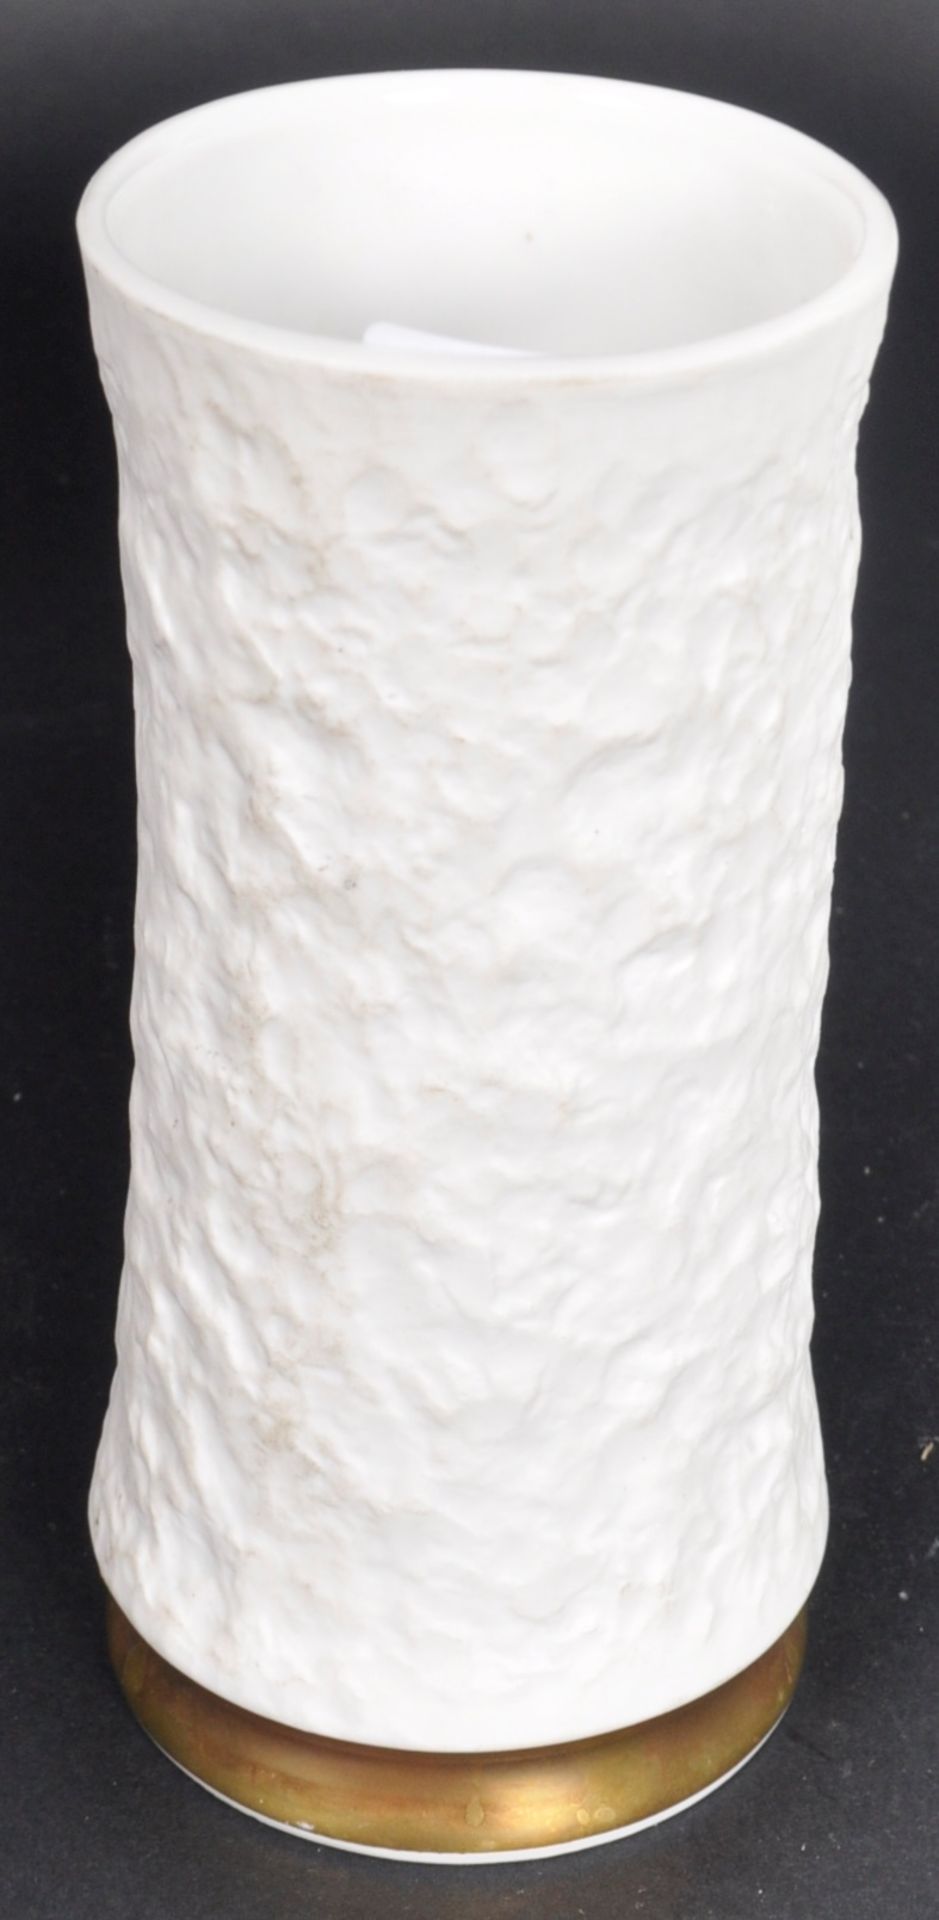 COLLECTION OF MID 20TH CENTURY GERMAN WHITE PORCELAIN VASES - Image 5 of 7